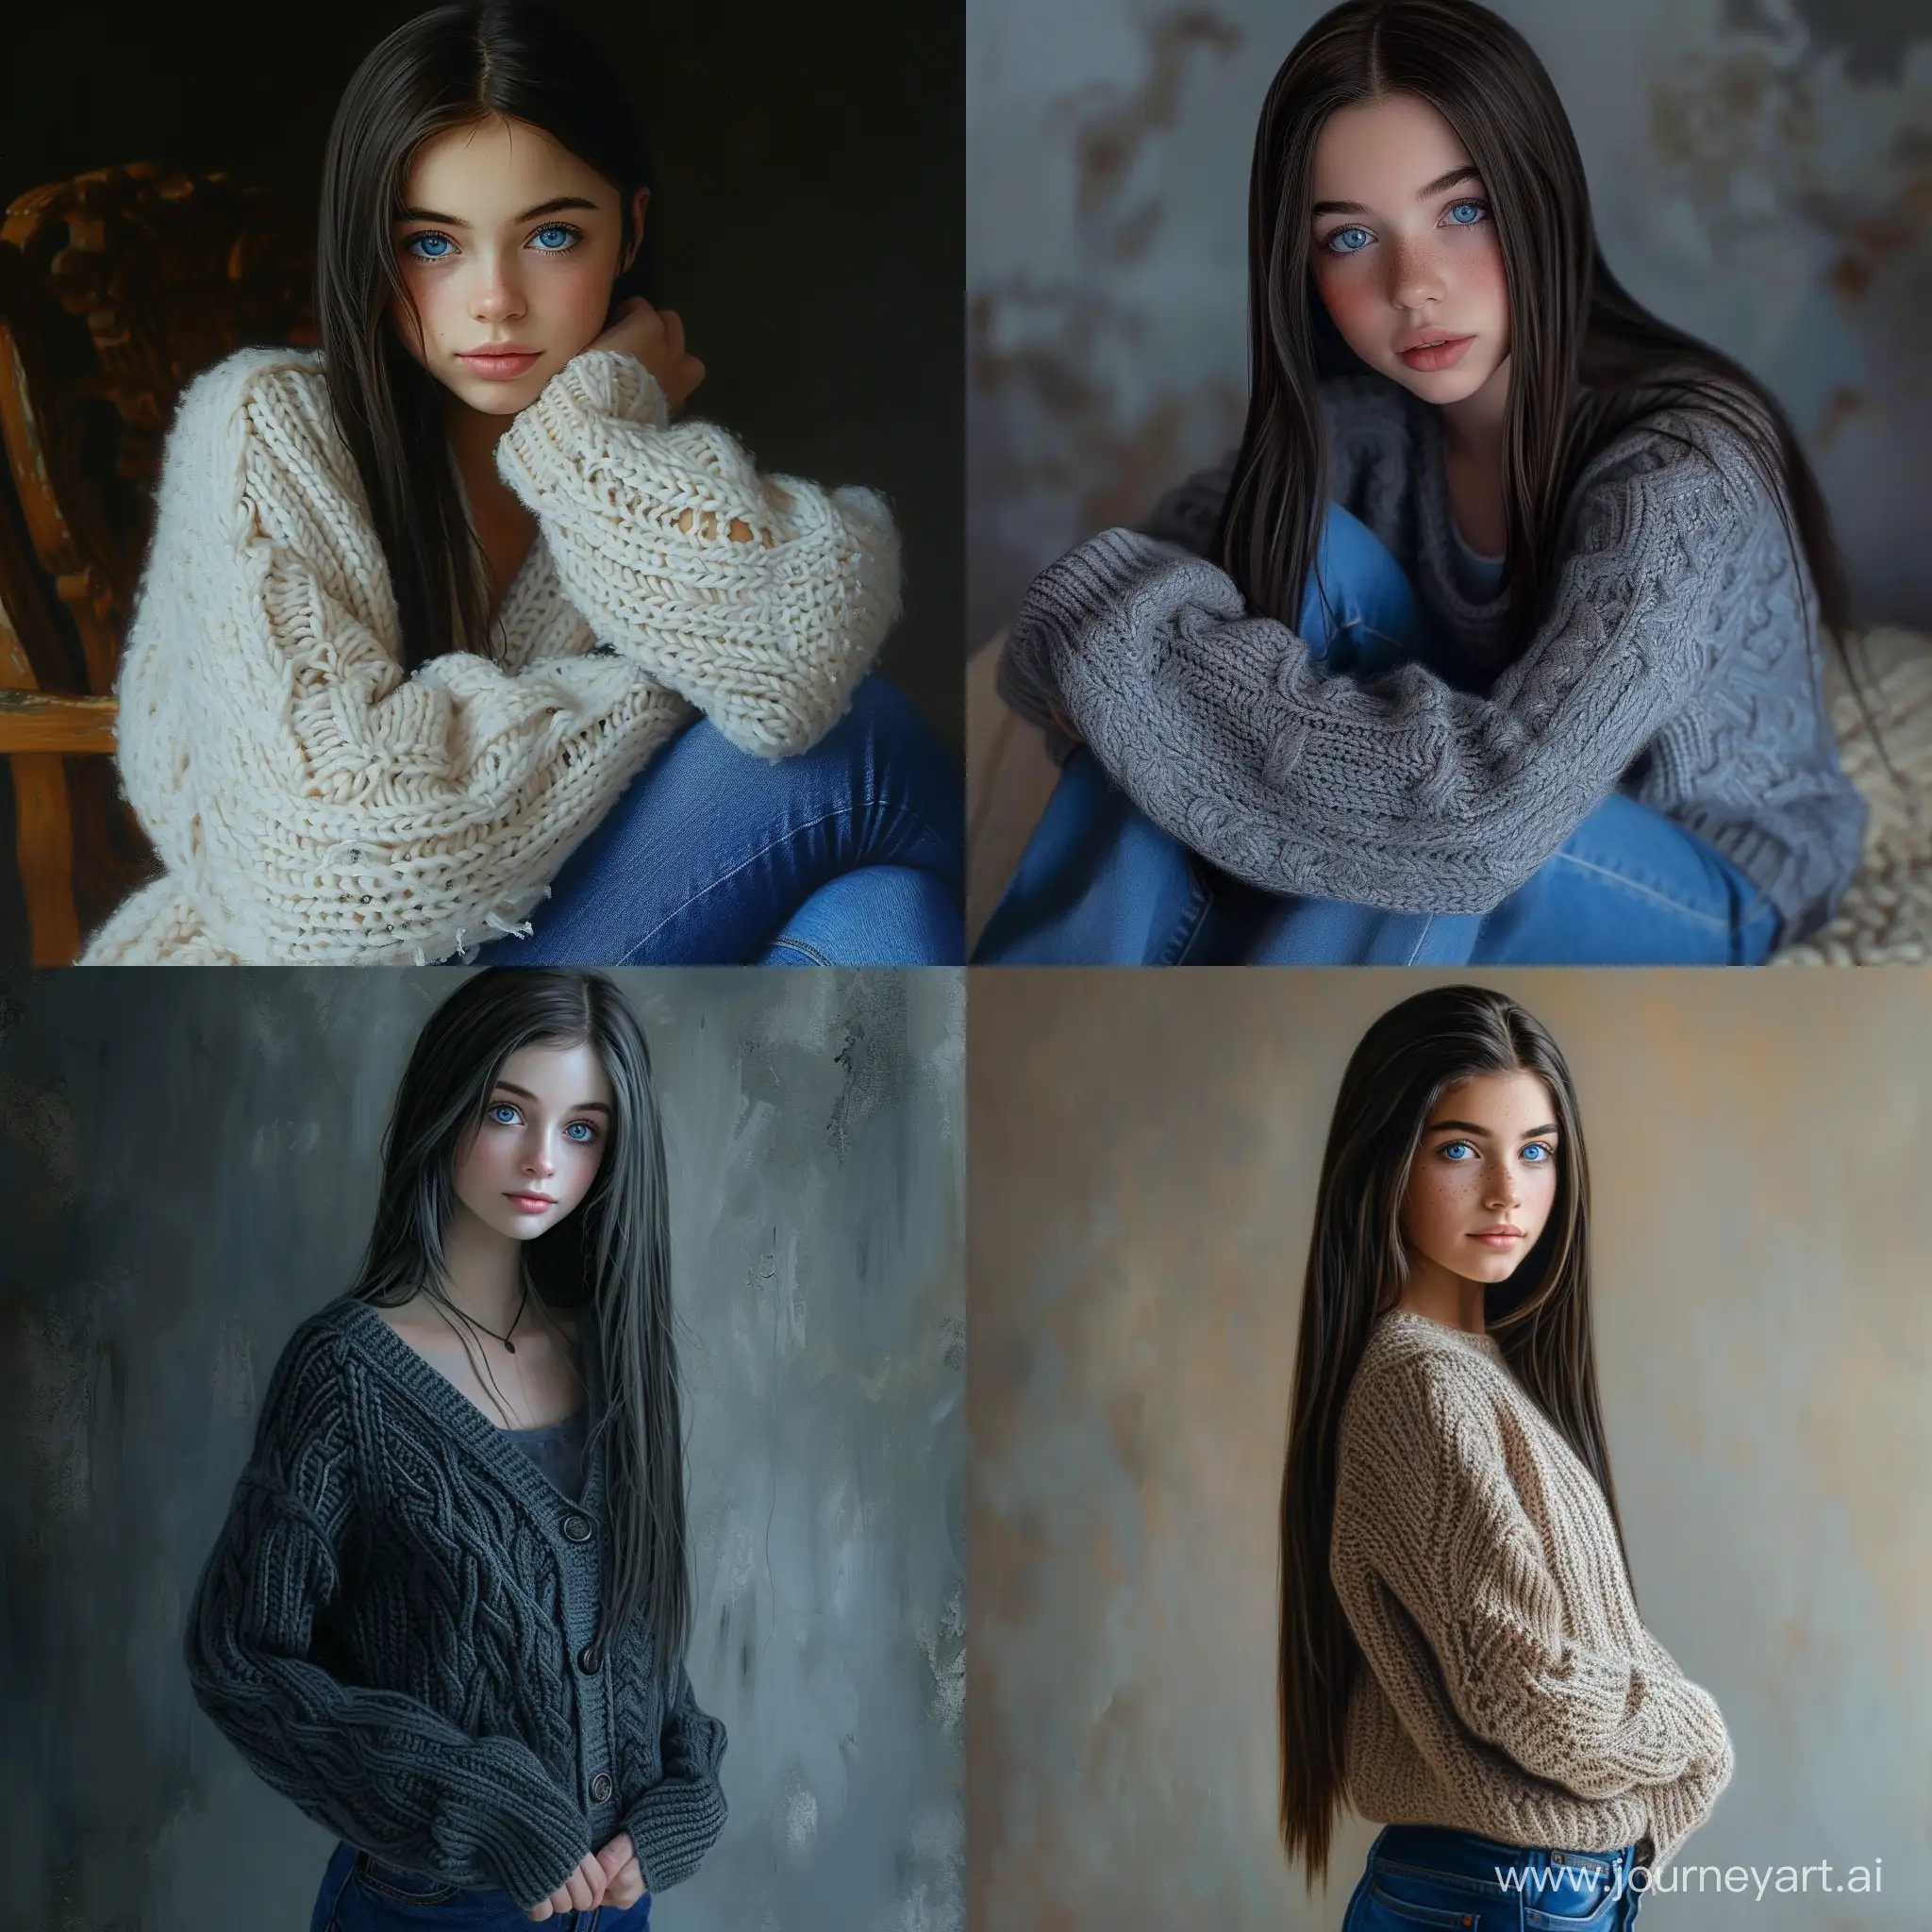 Captivating-Realistic-Portrait-of-a-15YearOld-Girl-in-Knitted-Cardigan-and-Blue-Jeans